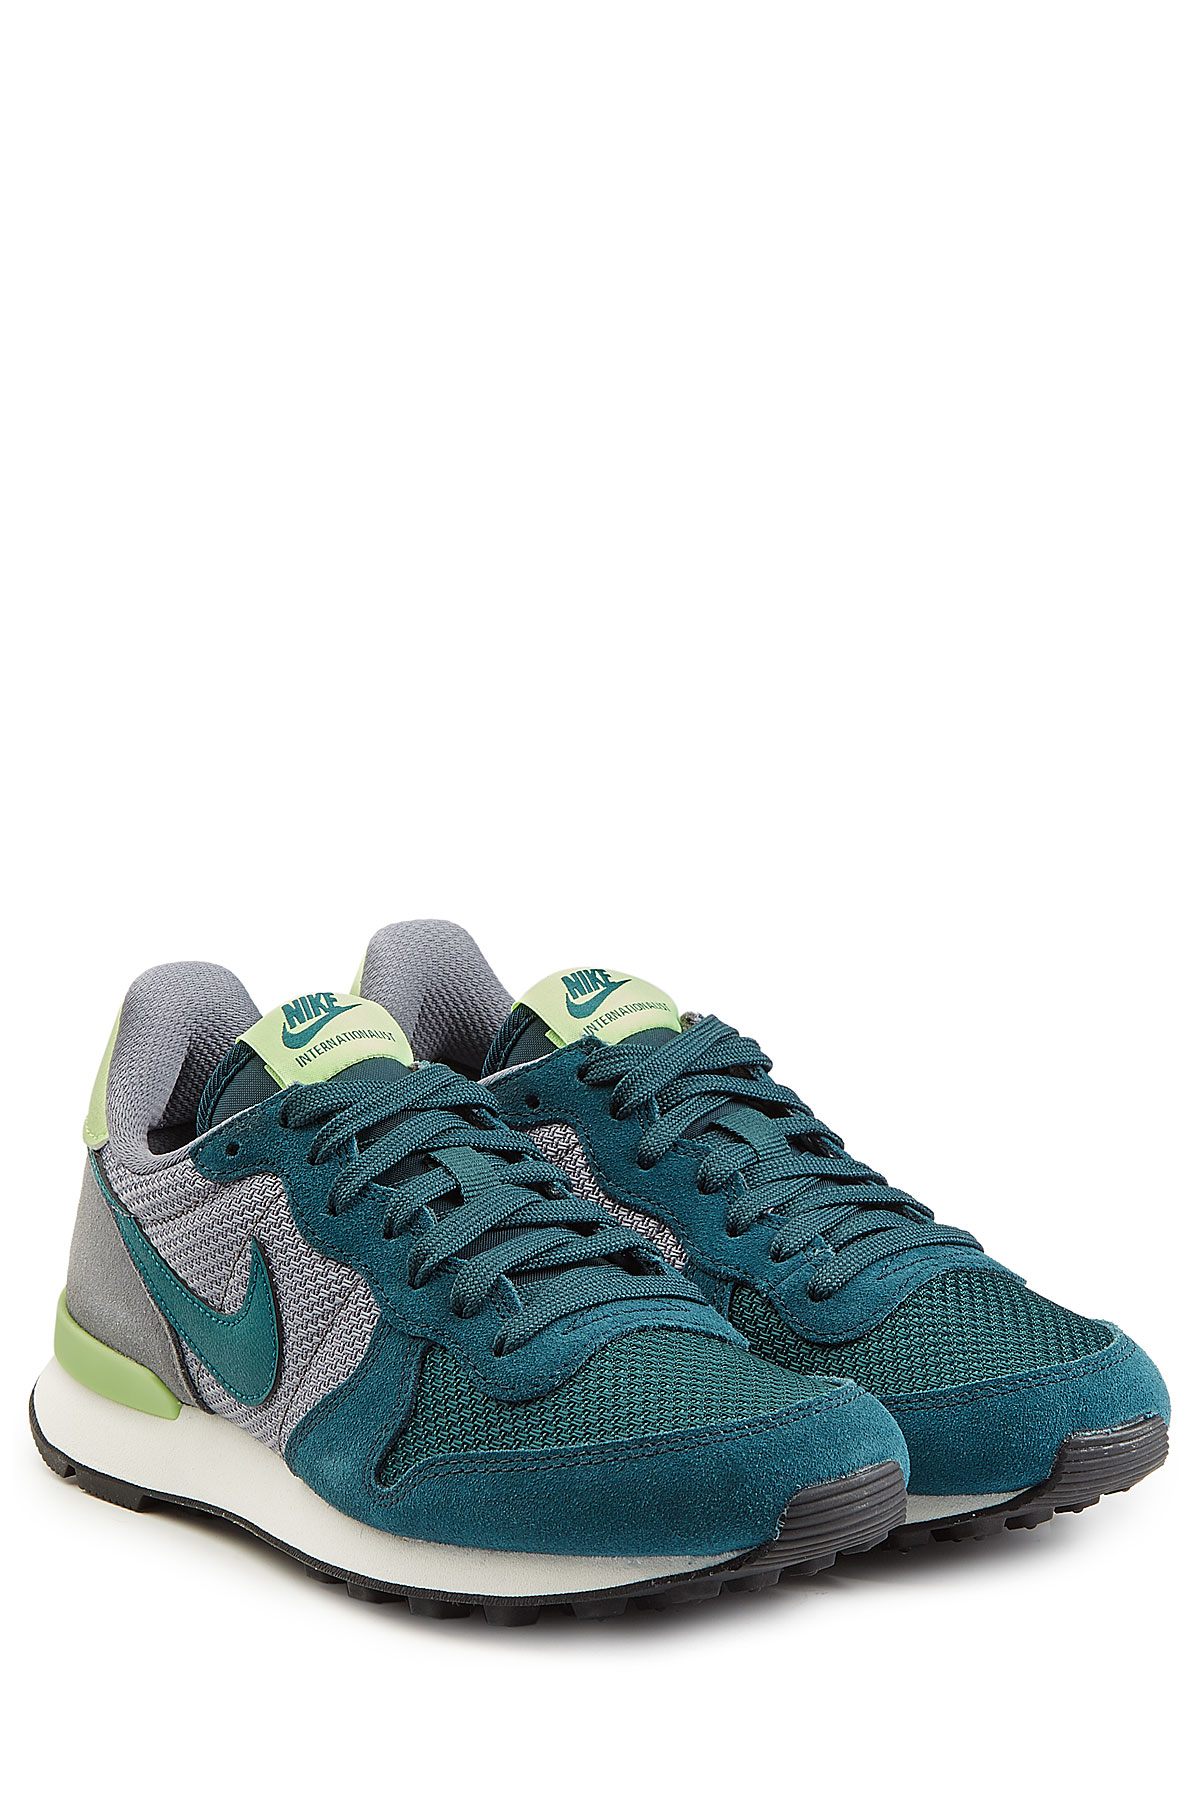 Nike Internationalist Leather And Mesh Sneakers Green in